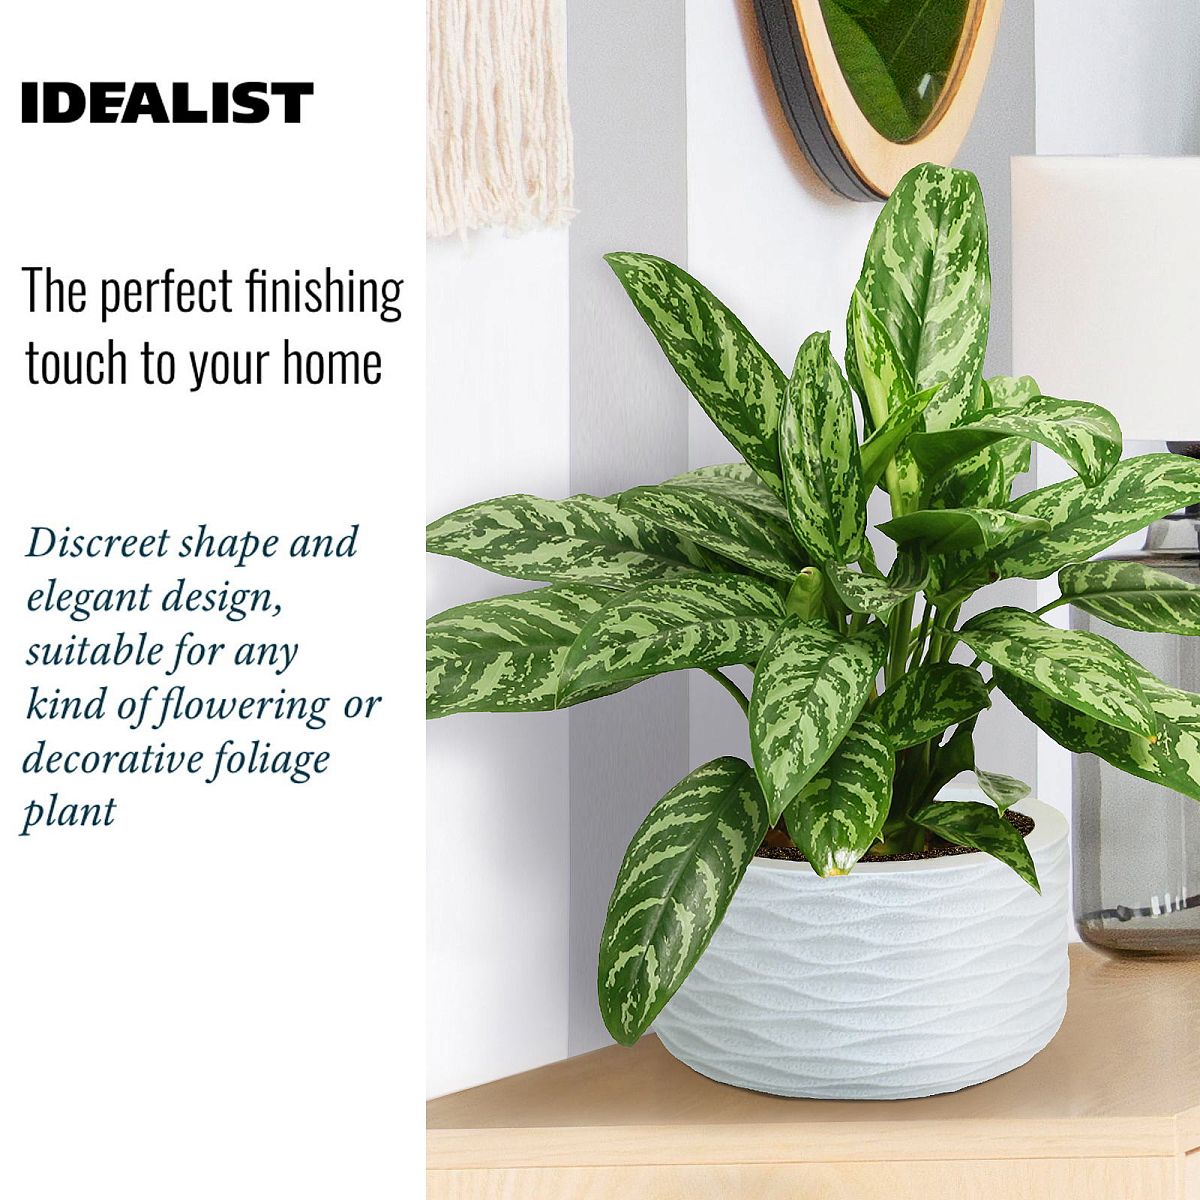 Wave Style Table and Hanging Cylinder Round Plant Pot Dual Use Indoor Planter by Idealist Lite